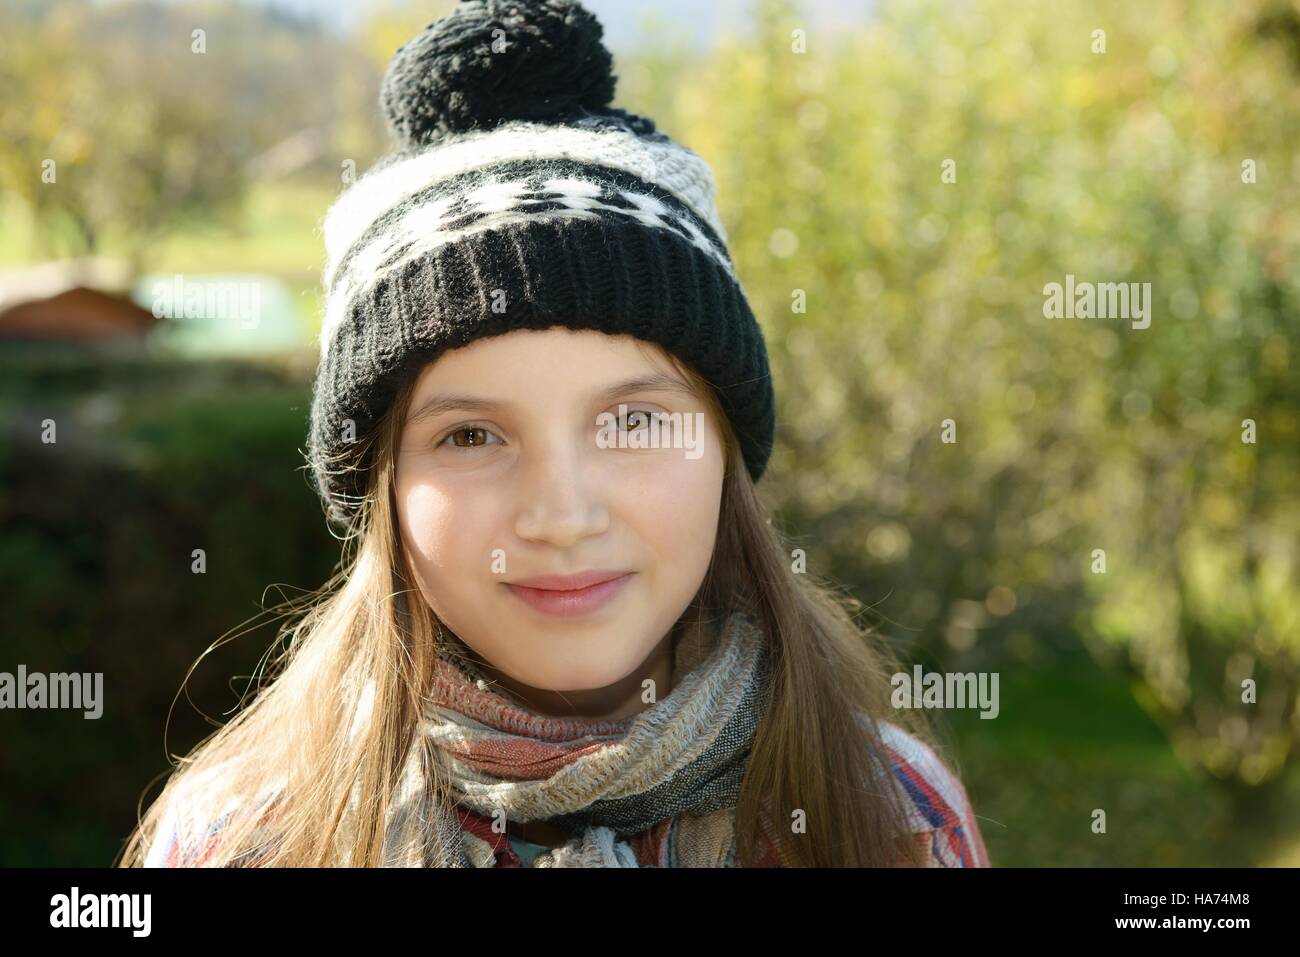 young pre teen girl with a winter cap, outdoors Stock Photo